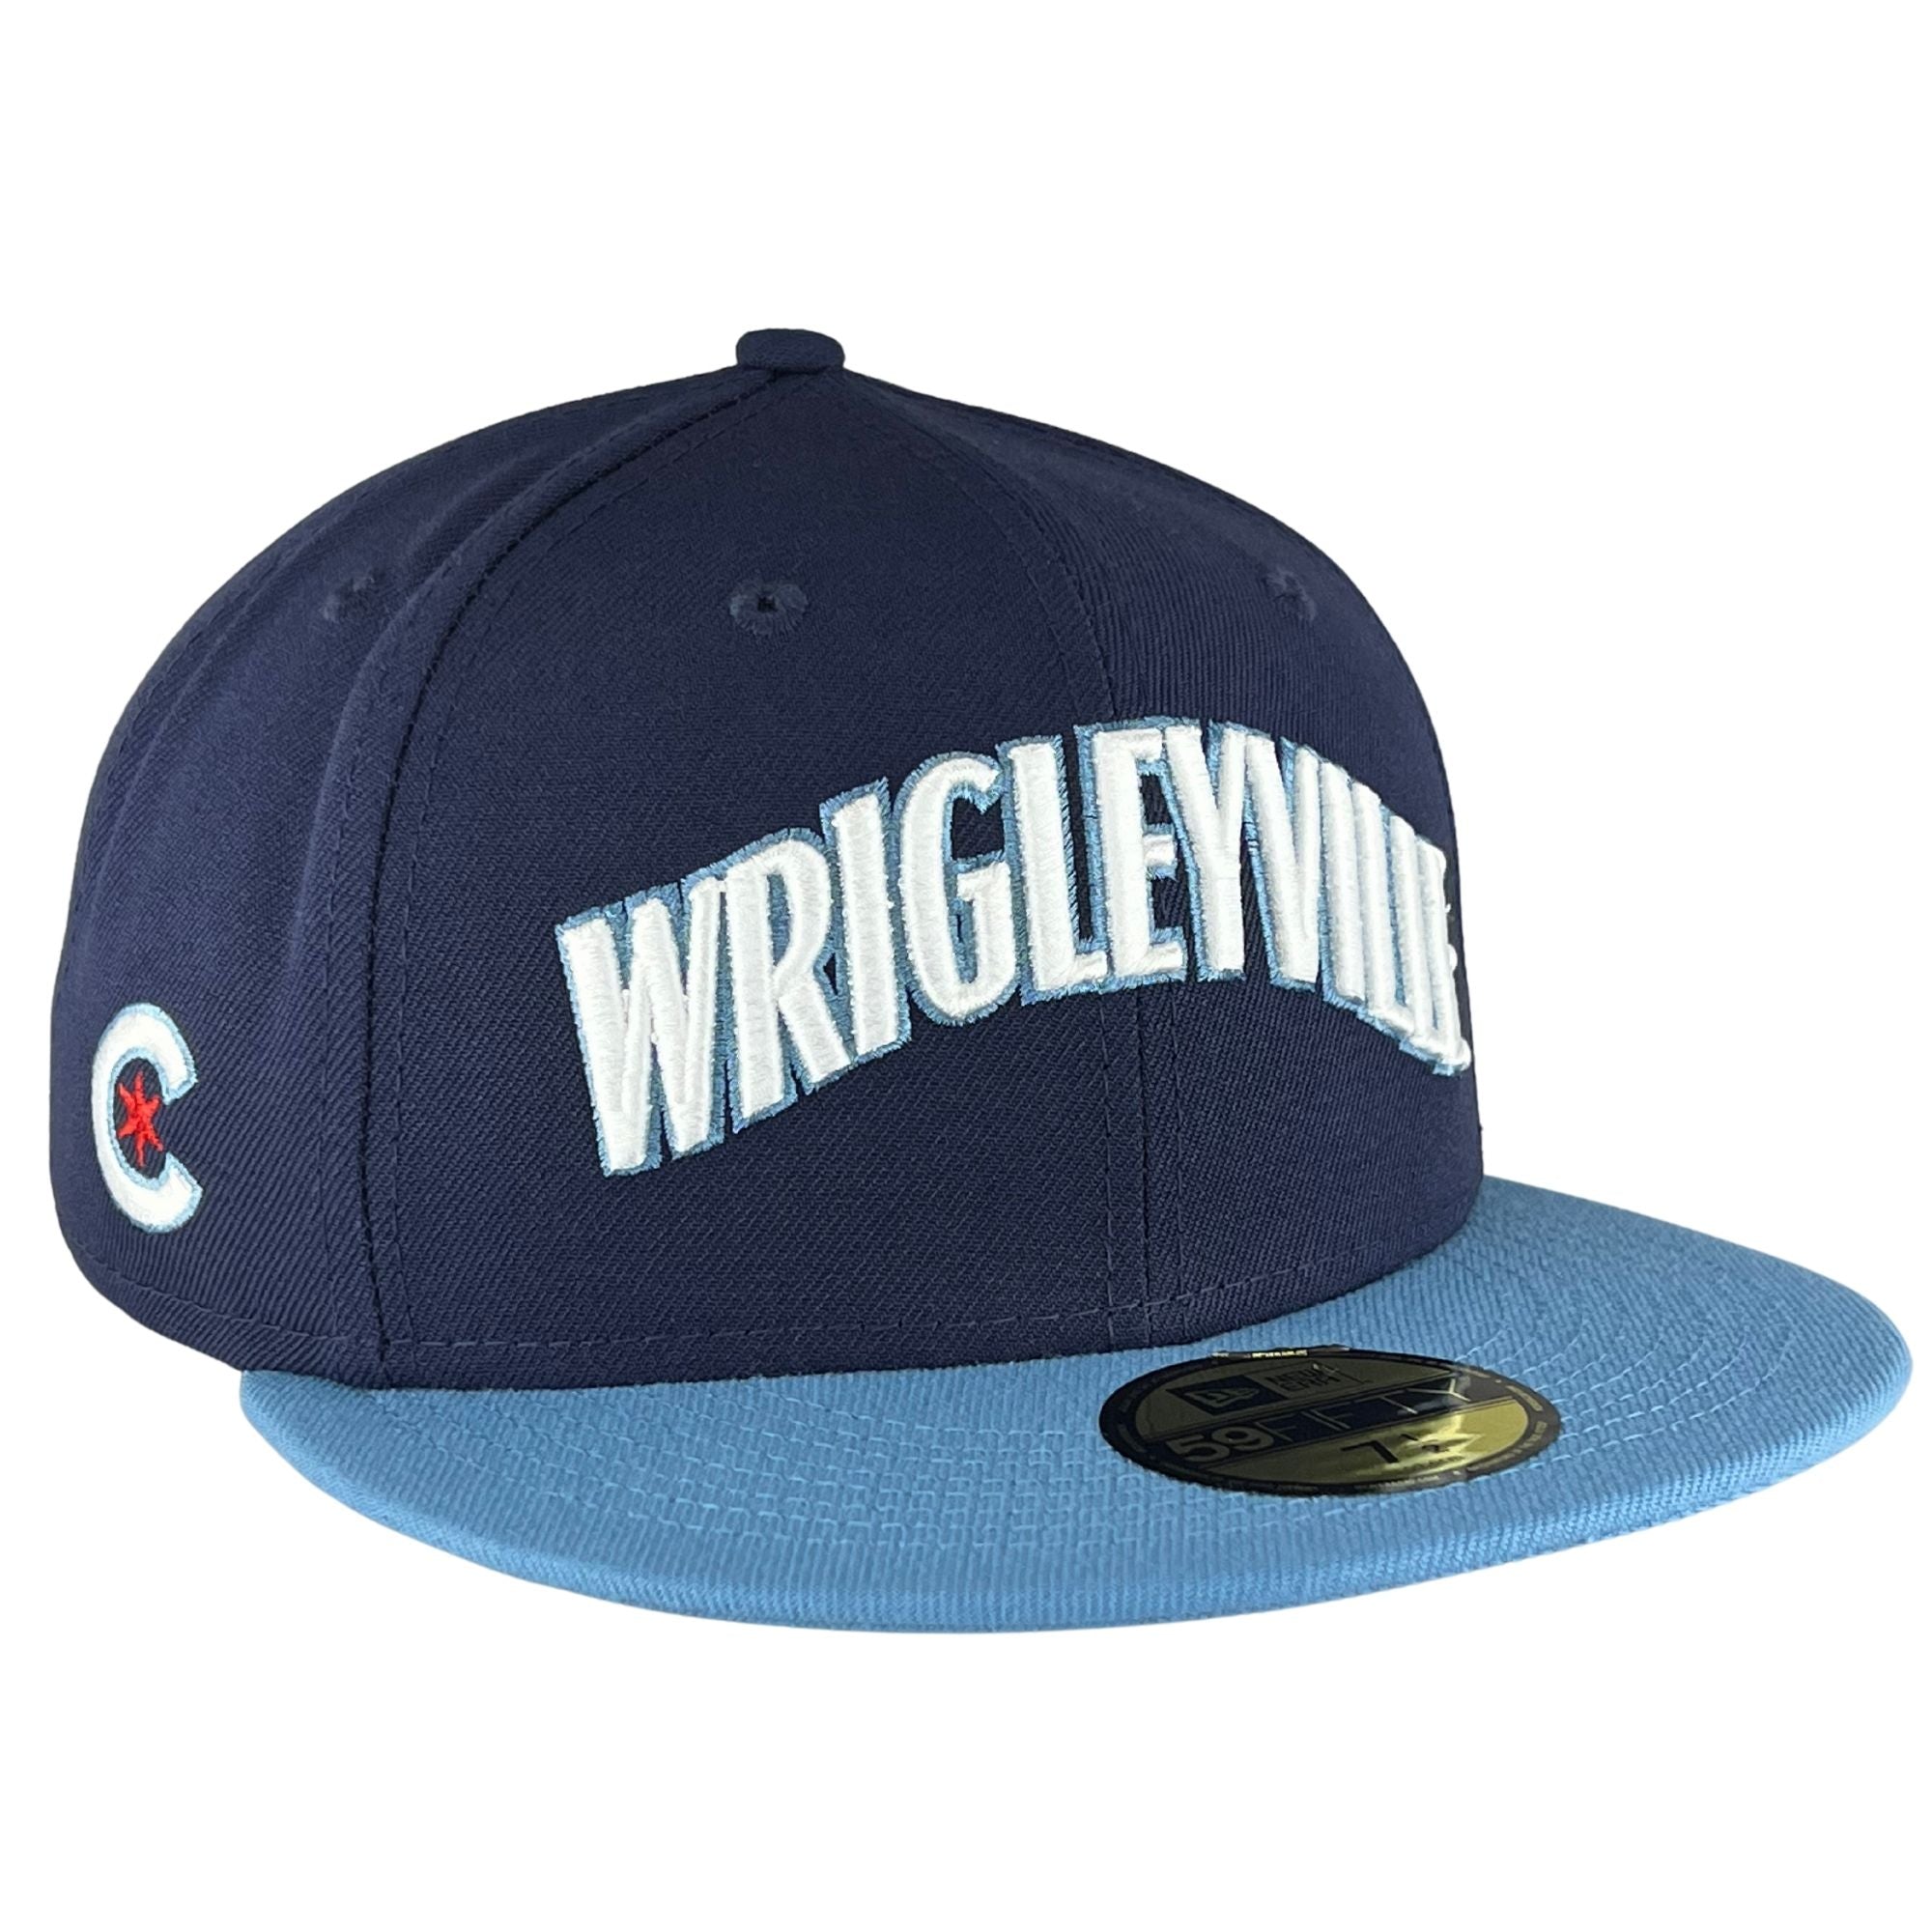 CHICAGO CUBS CITY CONNECT WRIGLEYVILLE NEW ERA FITTED CAP - ShopperBoard